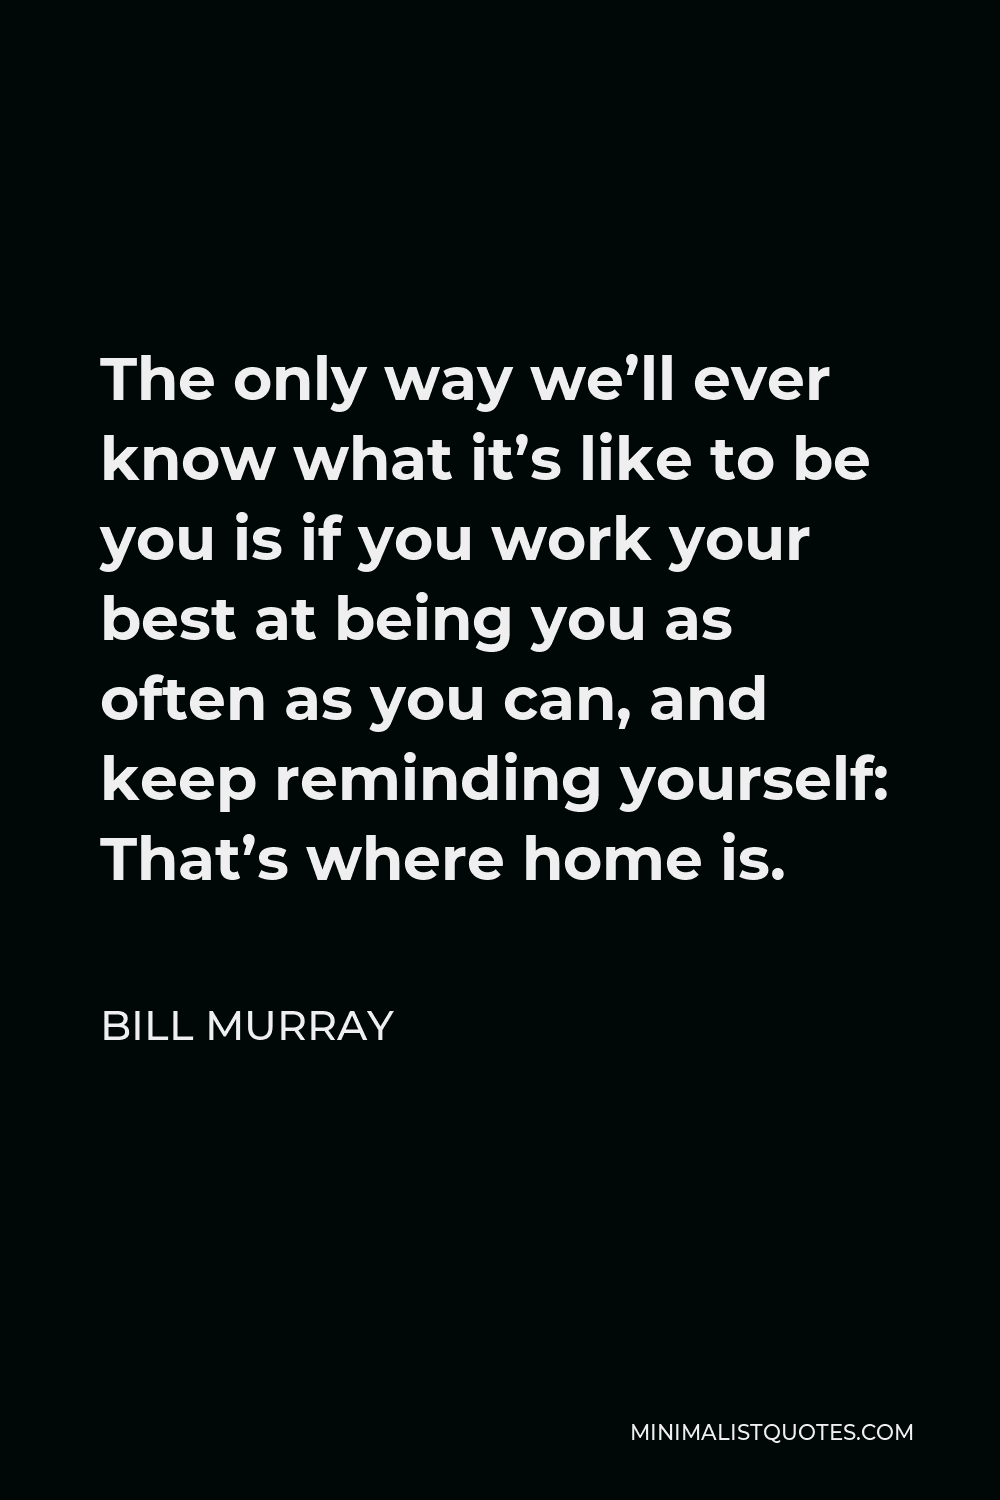 Bill Murray Quote - The only way we’ll ever know what it’s like to be you is if you work your best at being you as often as you can, and keep reminding yourself: That’s where home is.